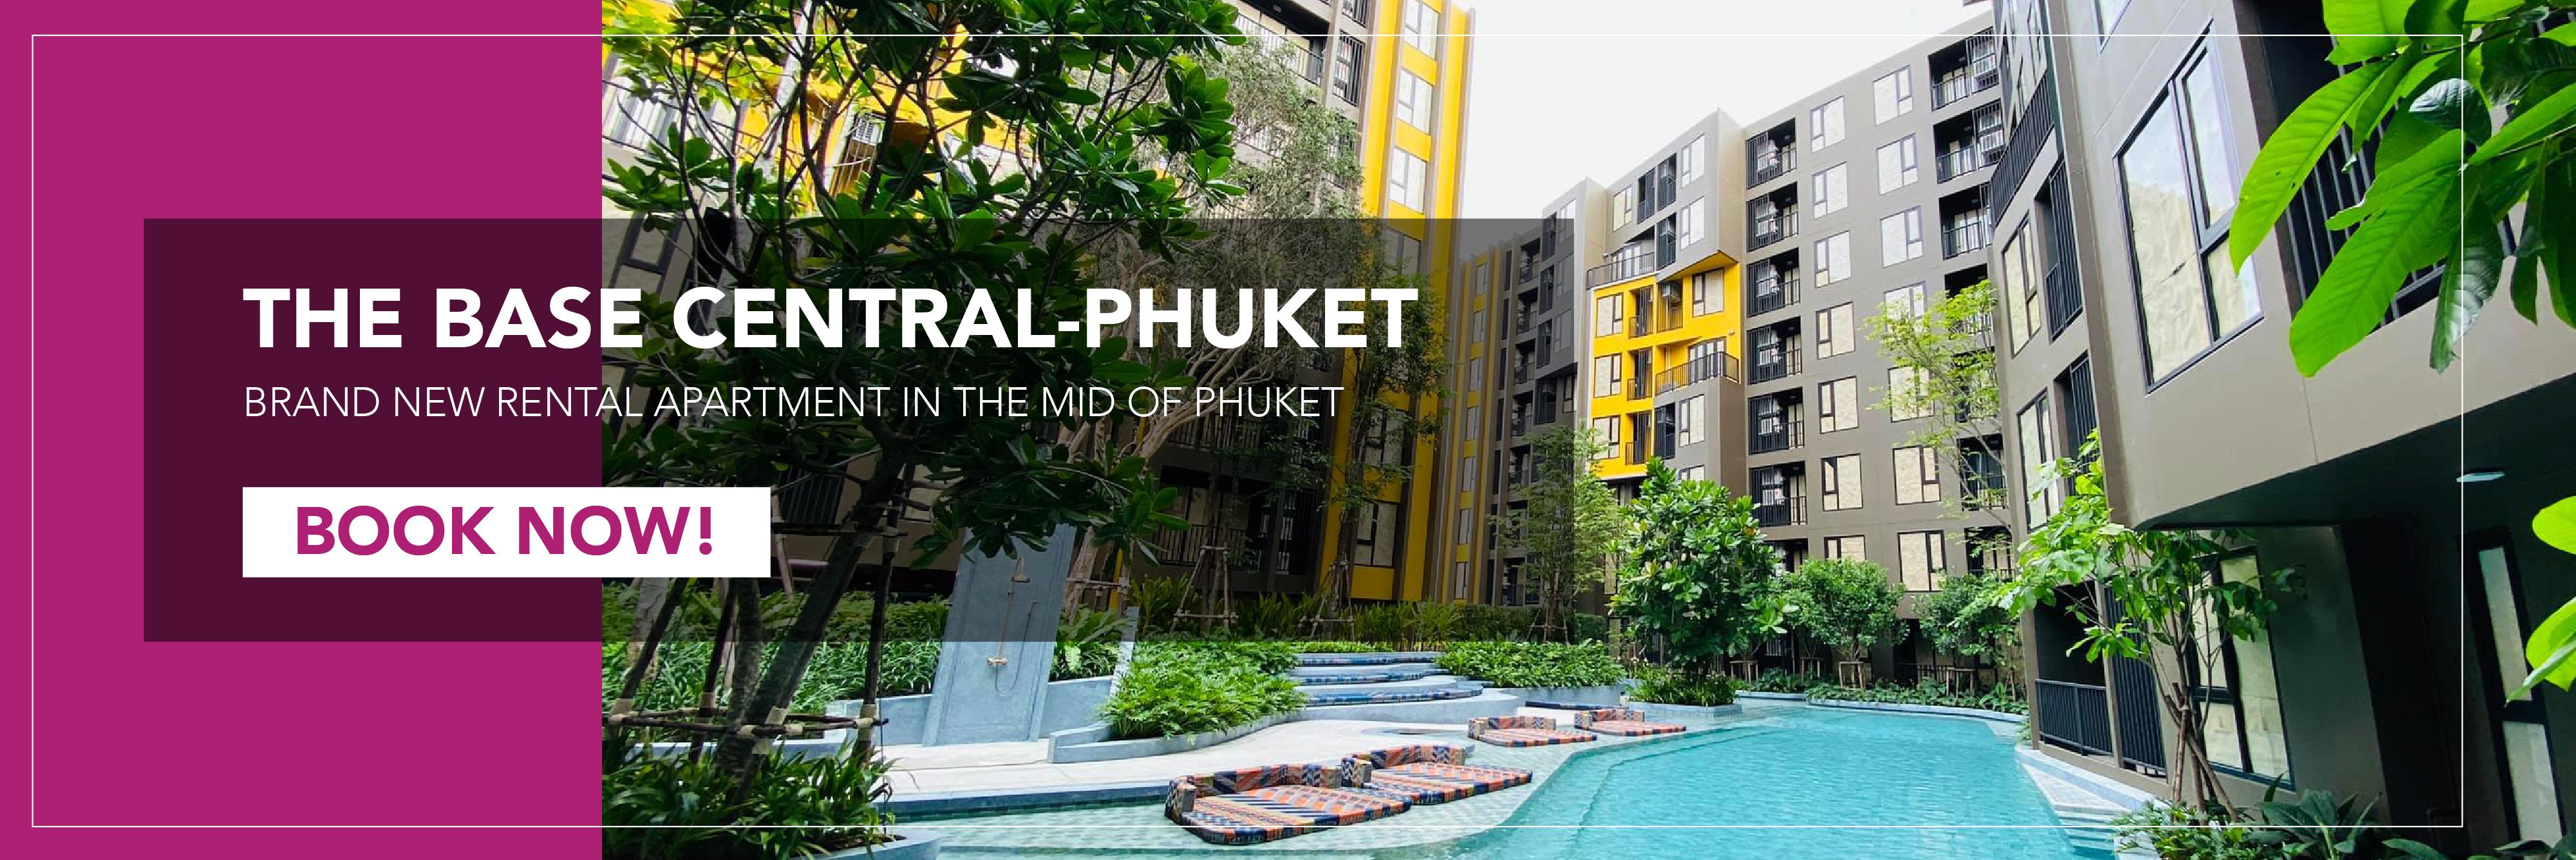 THE BASE Central Phuket Brand new rental apartment in the mid of Phuket